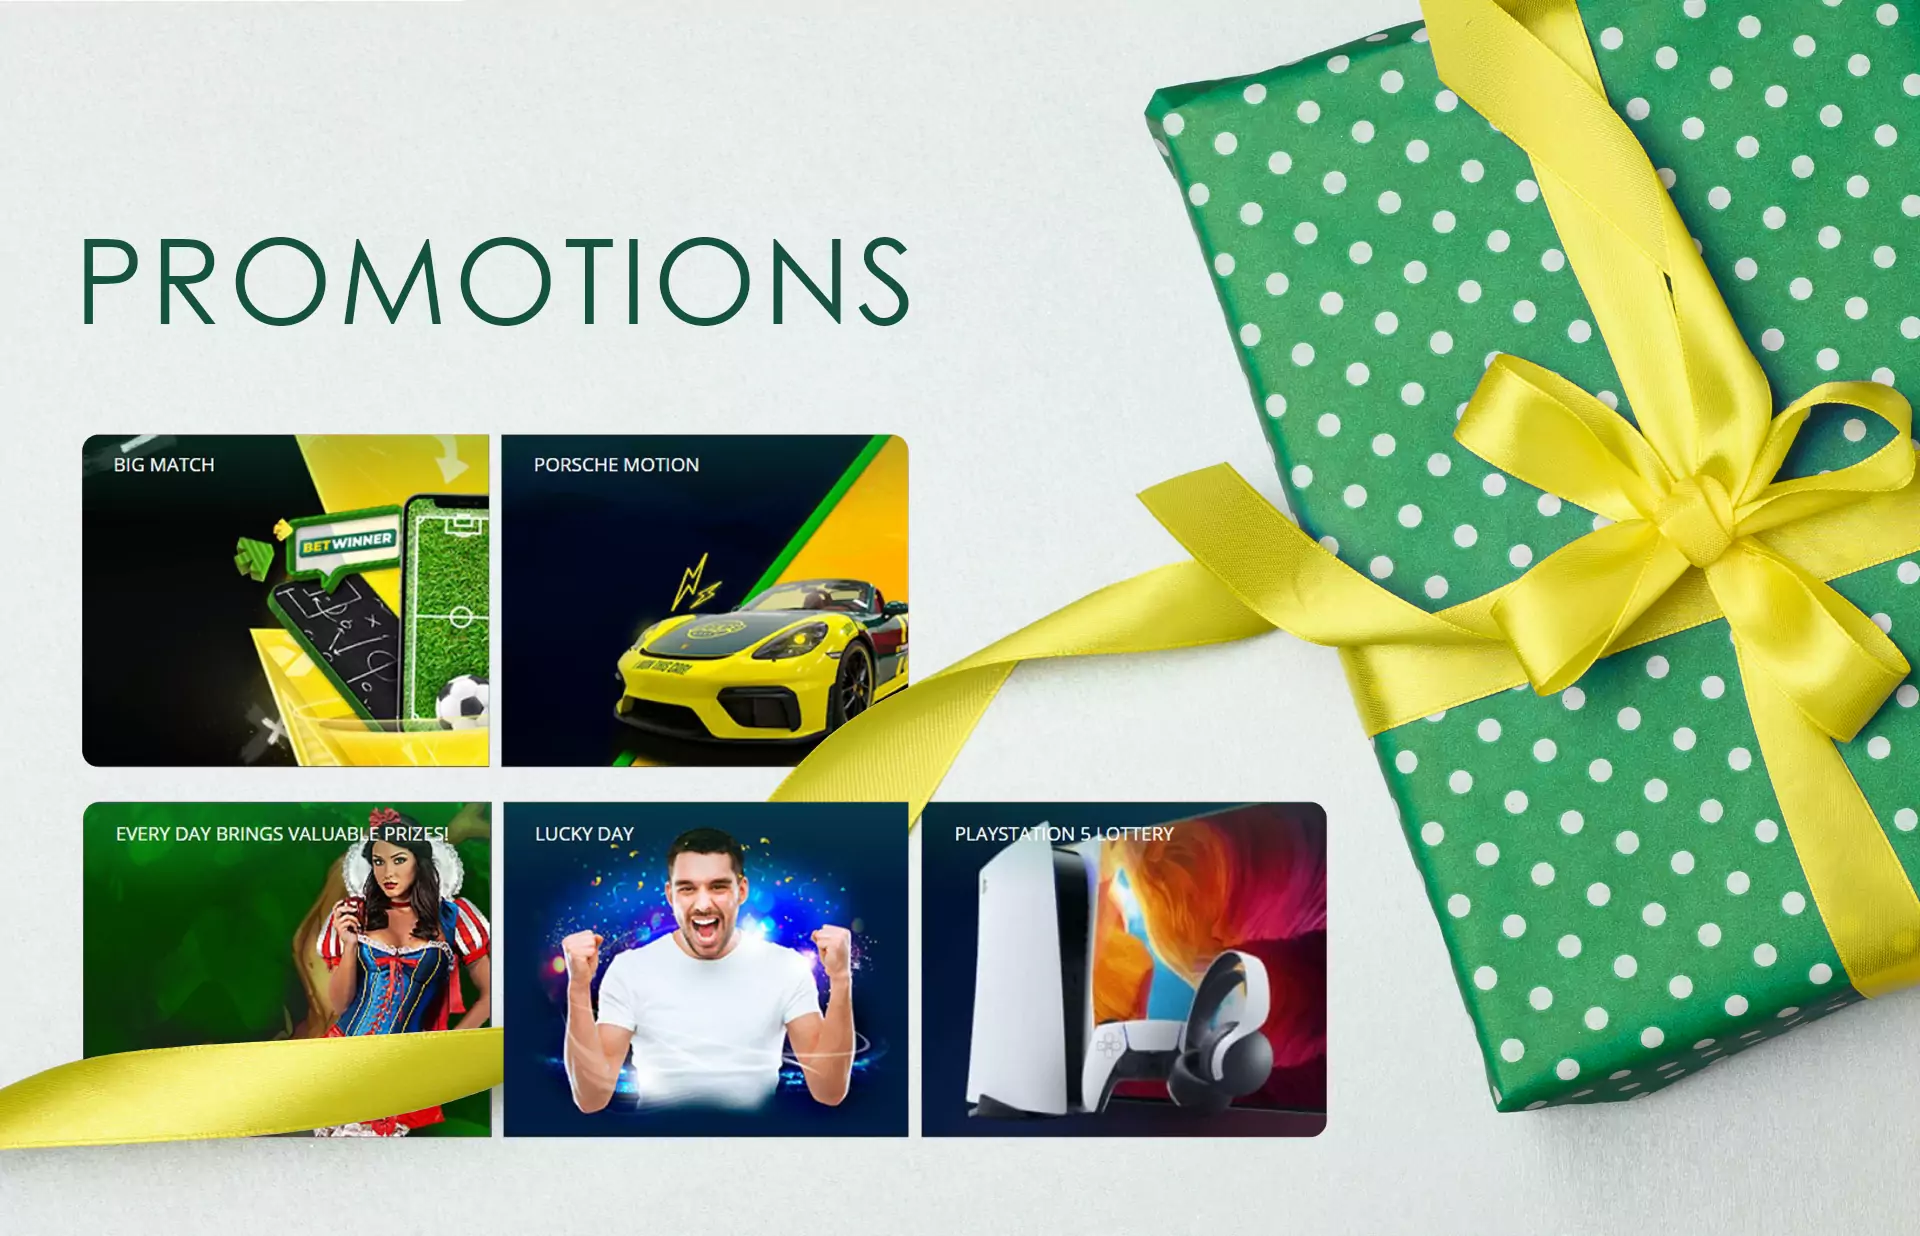 Check the promotions offers and use that suits you.